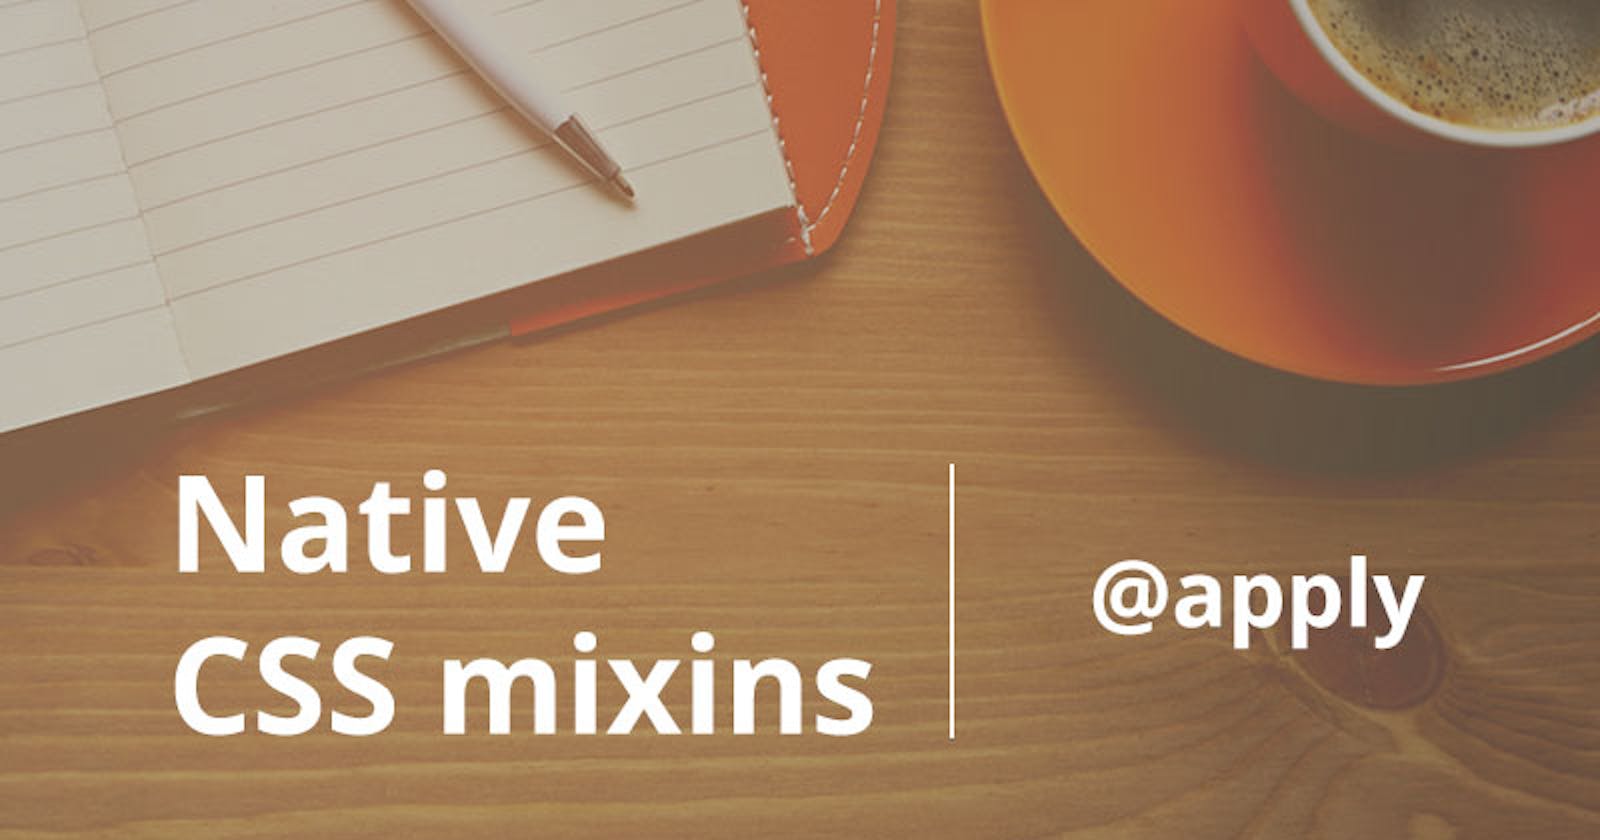 Creating native CSS mixins with @apply rule